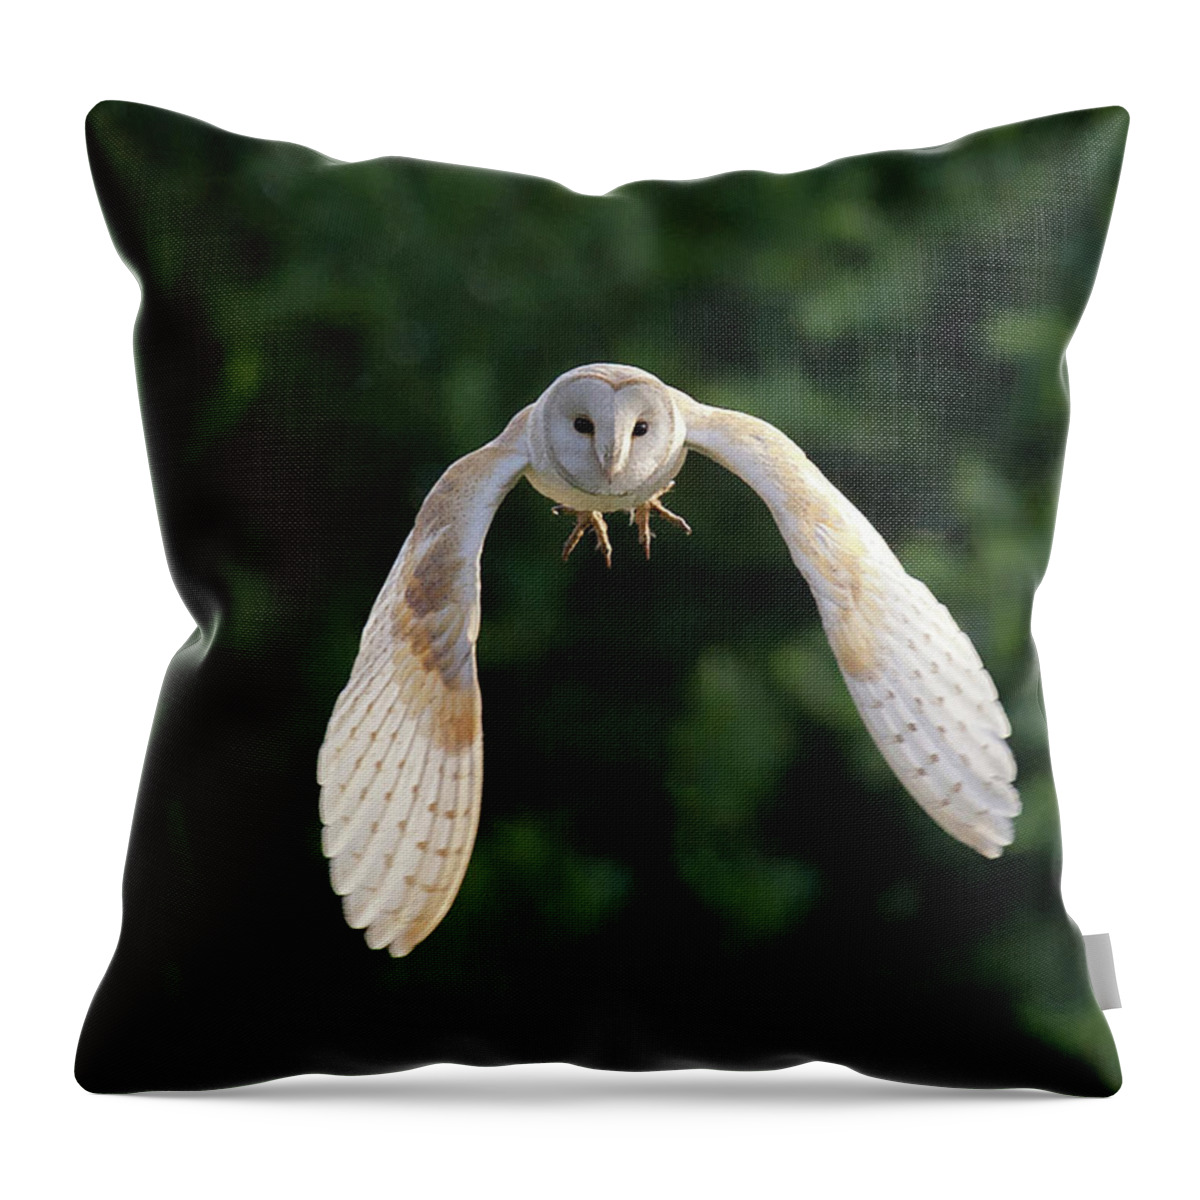 Animal Themes Throw Pillow featuring the photograph Barn Owl Flying by Tony Mclean